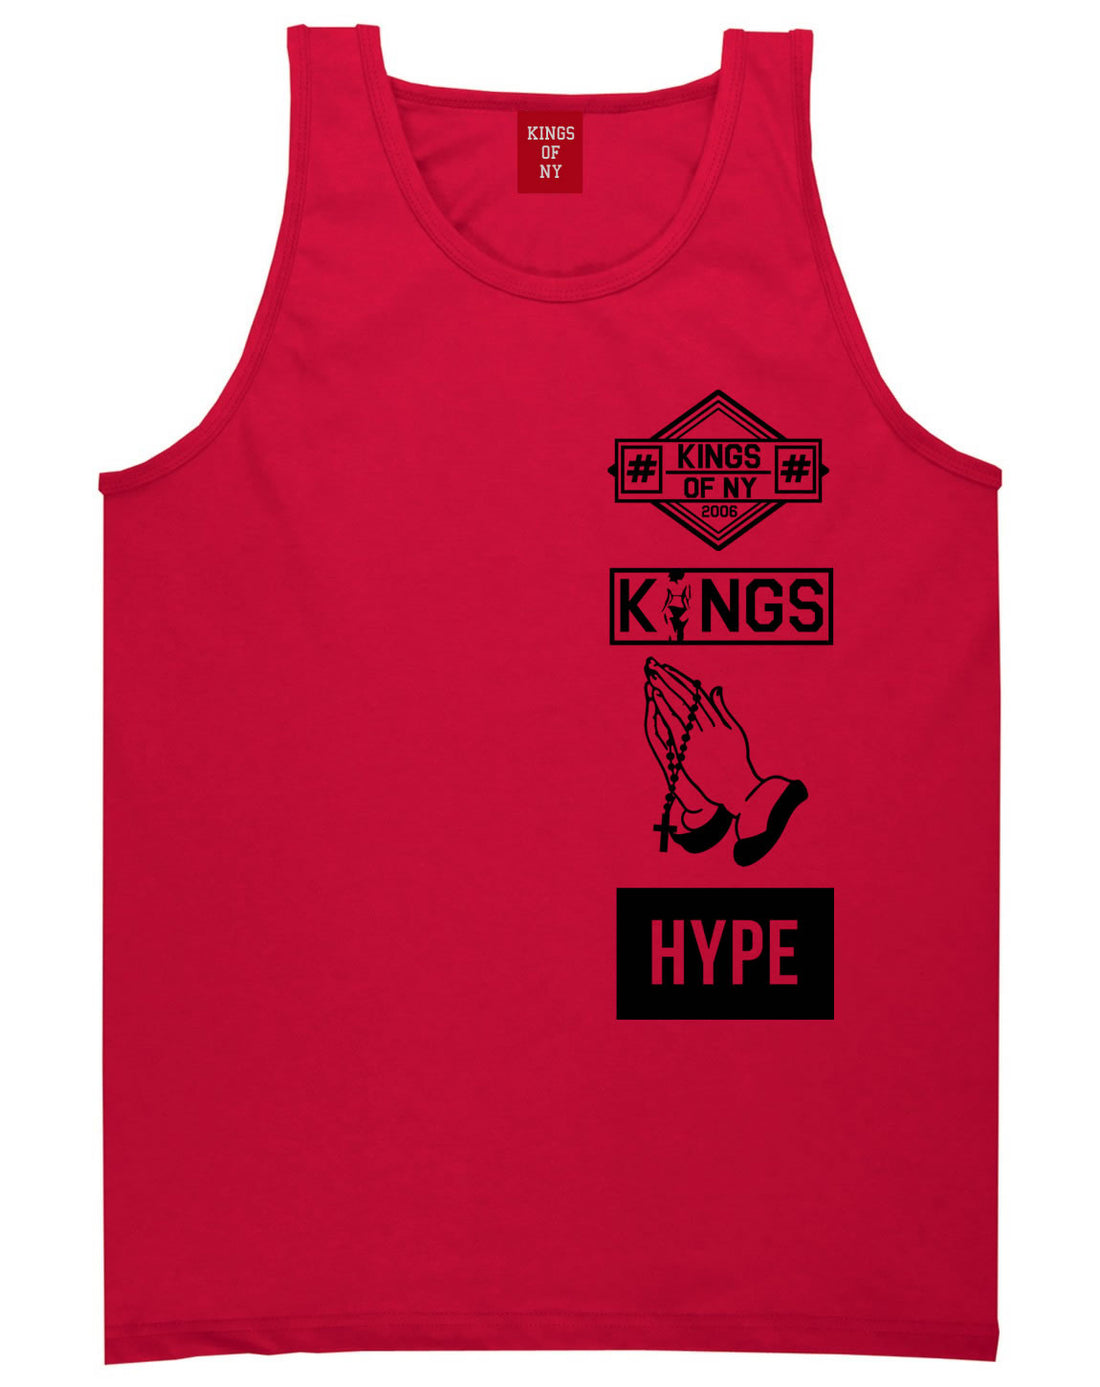 Prayer Hands Hype Left Logos Tank Top in Red By Kings Of NY